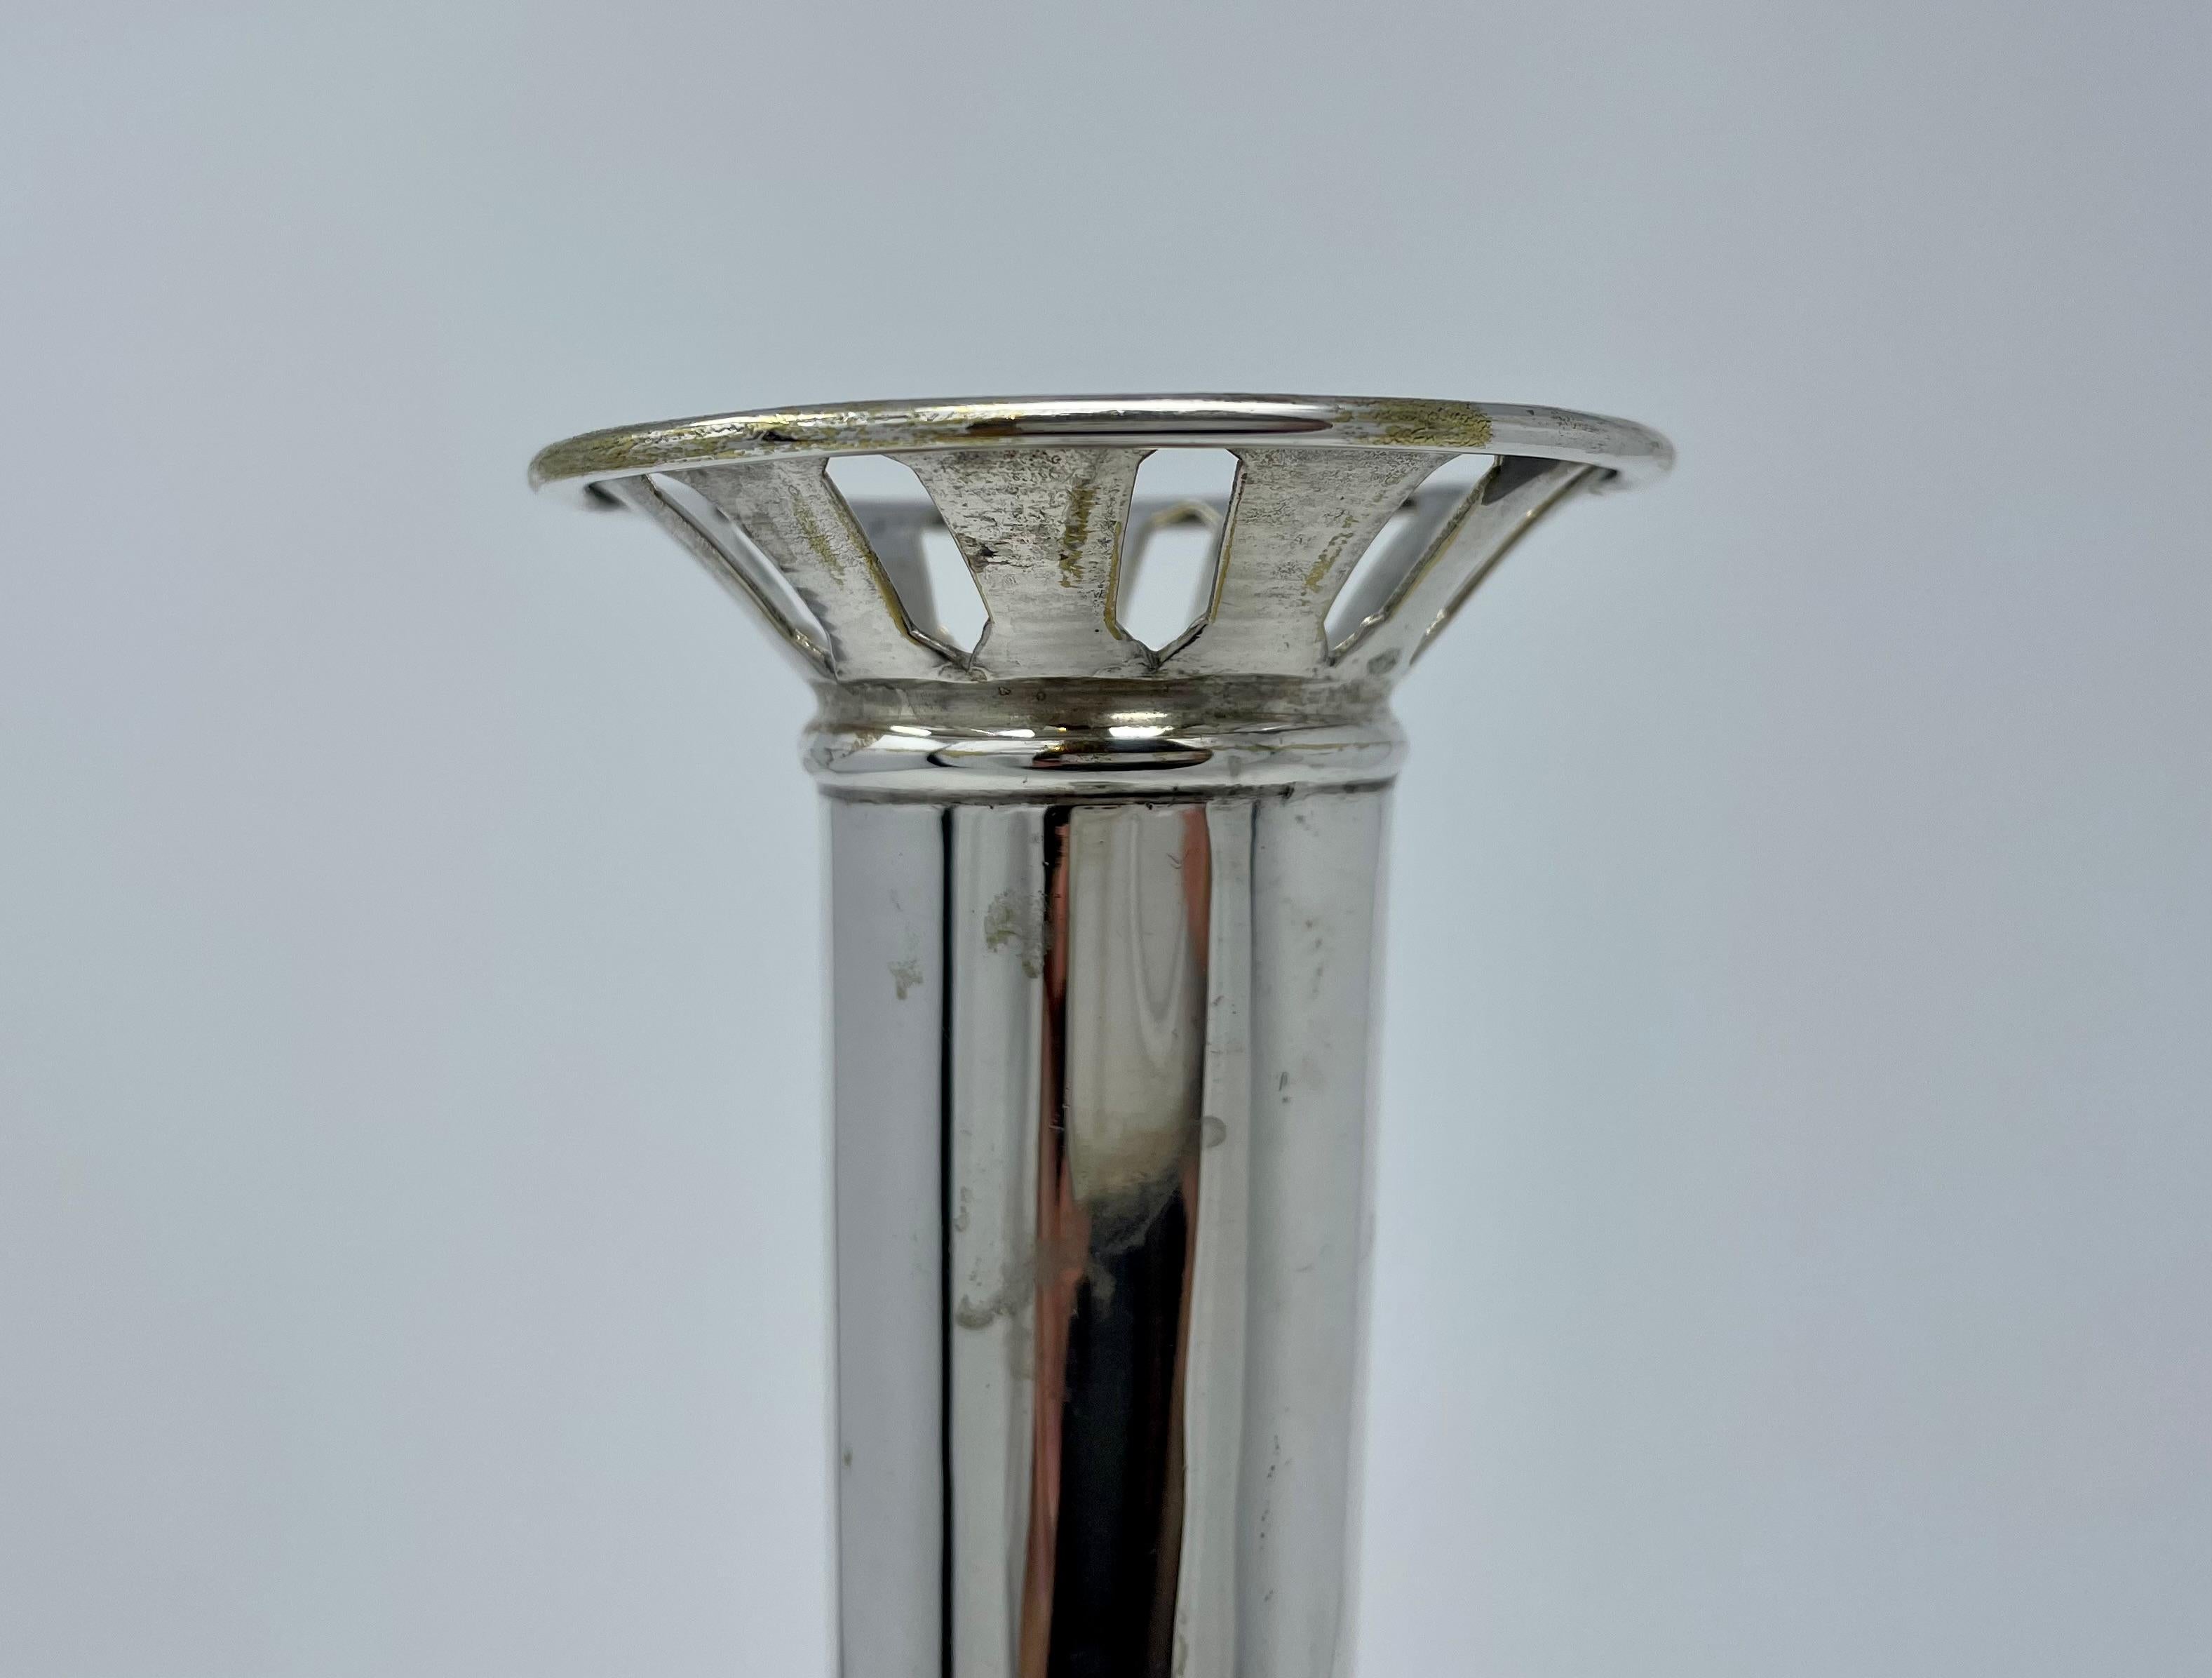 Early 20th century Antique Silver Plate Bud Vase.